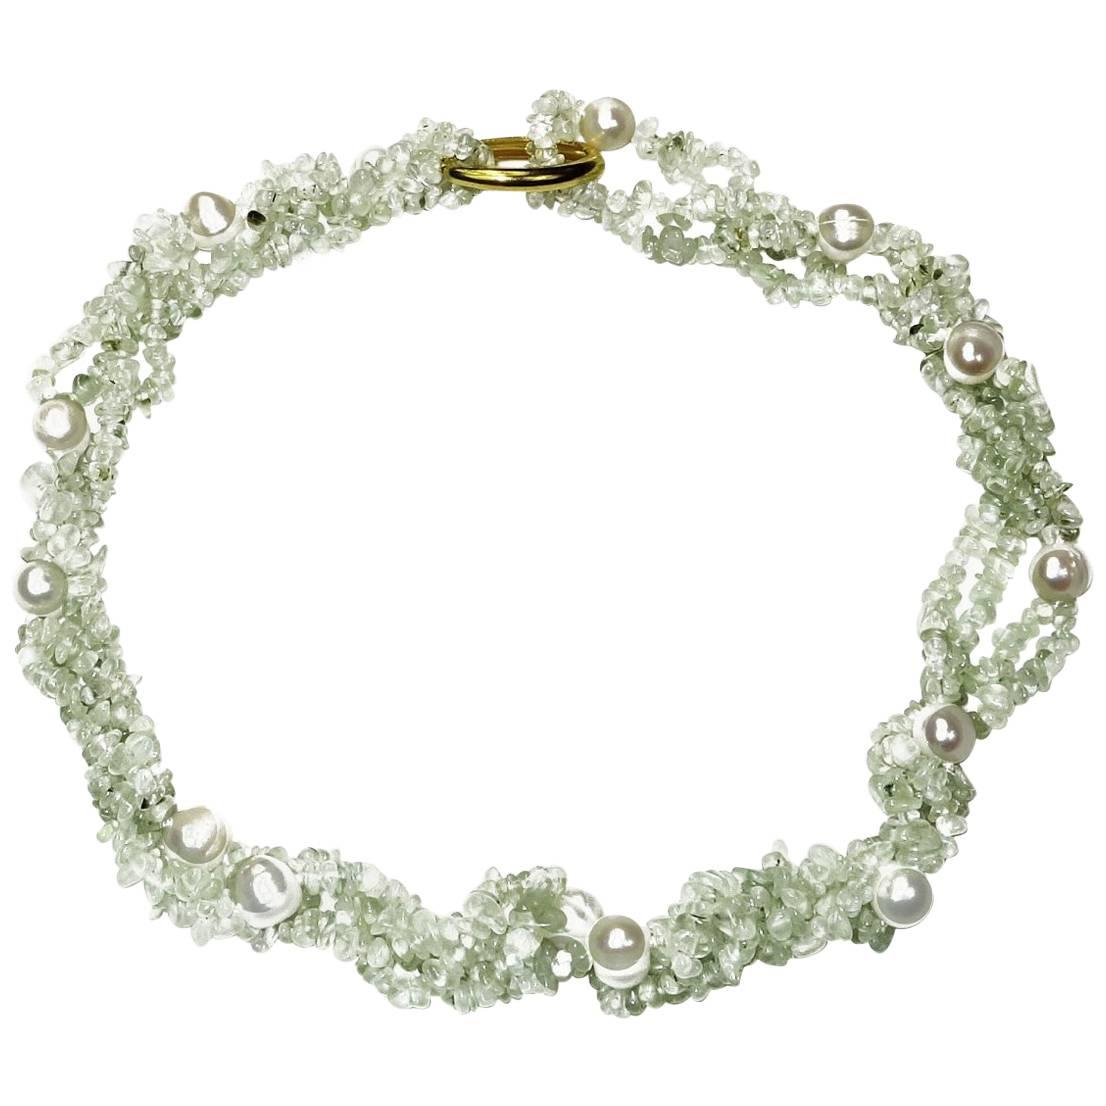 38 Inch Infinity Necklace of Lovely Green Prehnite Chips in double rows secured with Freshwater Pearls.  The tumbled and polished Prehnite combines so well with freshwater pearls.  This necklace with enhance all your ensembles.  Gold tone and Silver